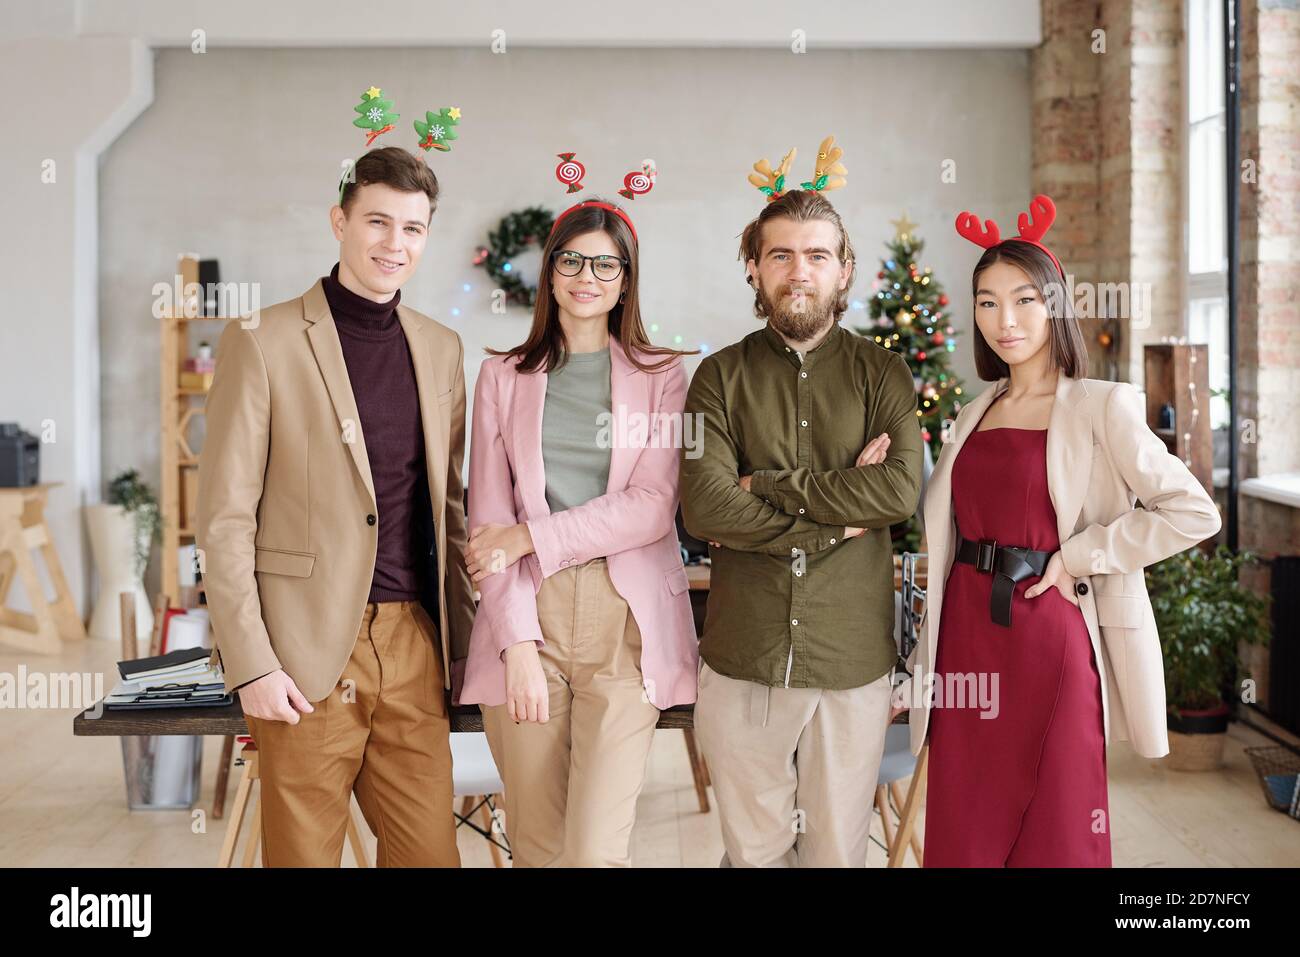 Row of four young white collar workers in smart casualwear and xmas headbands Stock Photo